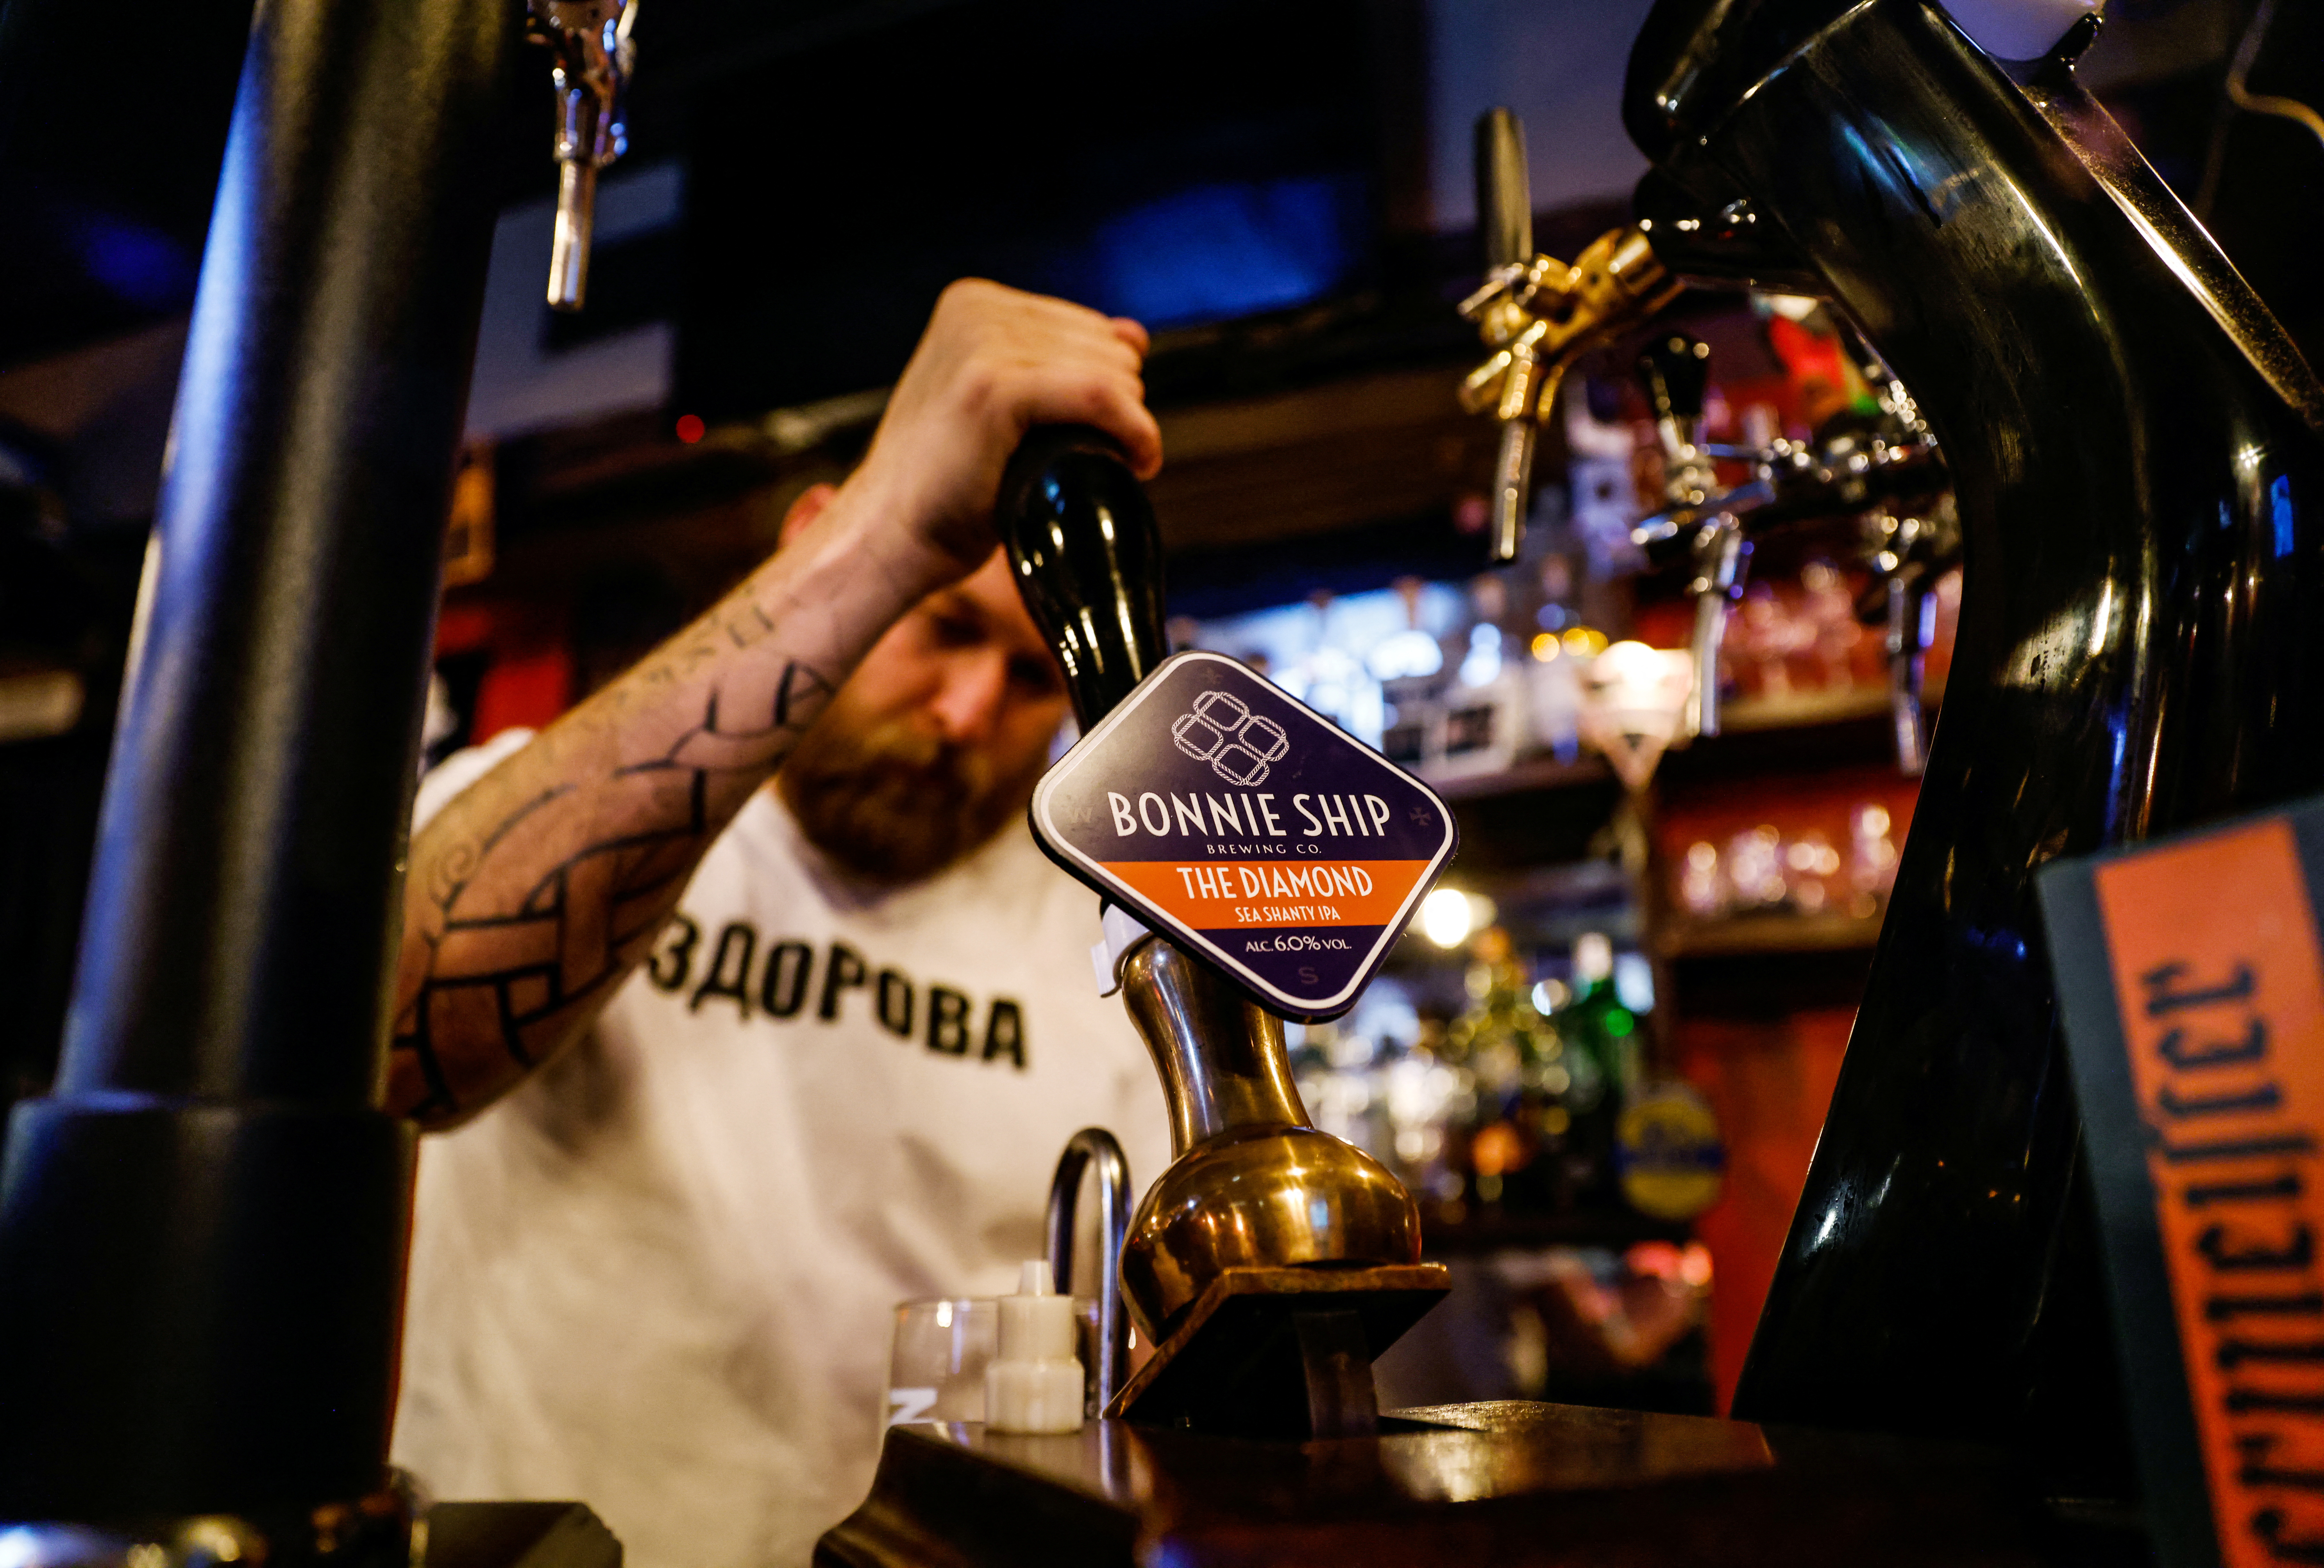 A bartender pours beer at a bar in Moscow